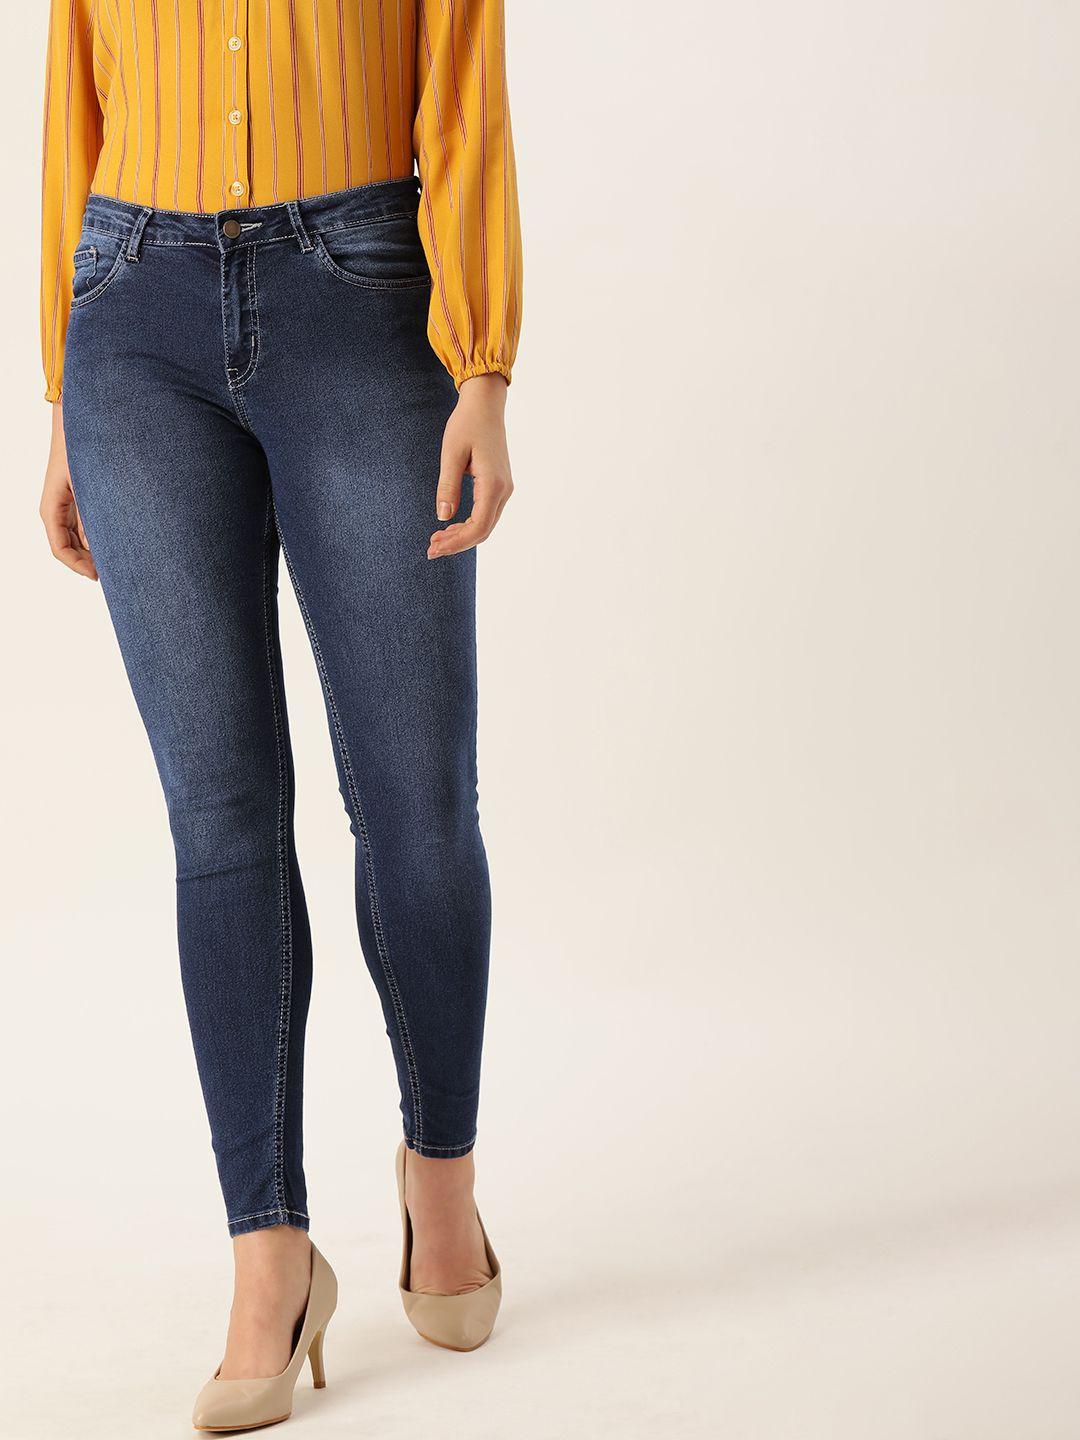 dressberry-women-blue-skinny-fit-mid-rise-clean-look-stretchable-jeans